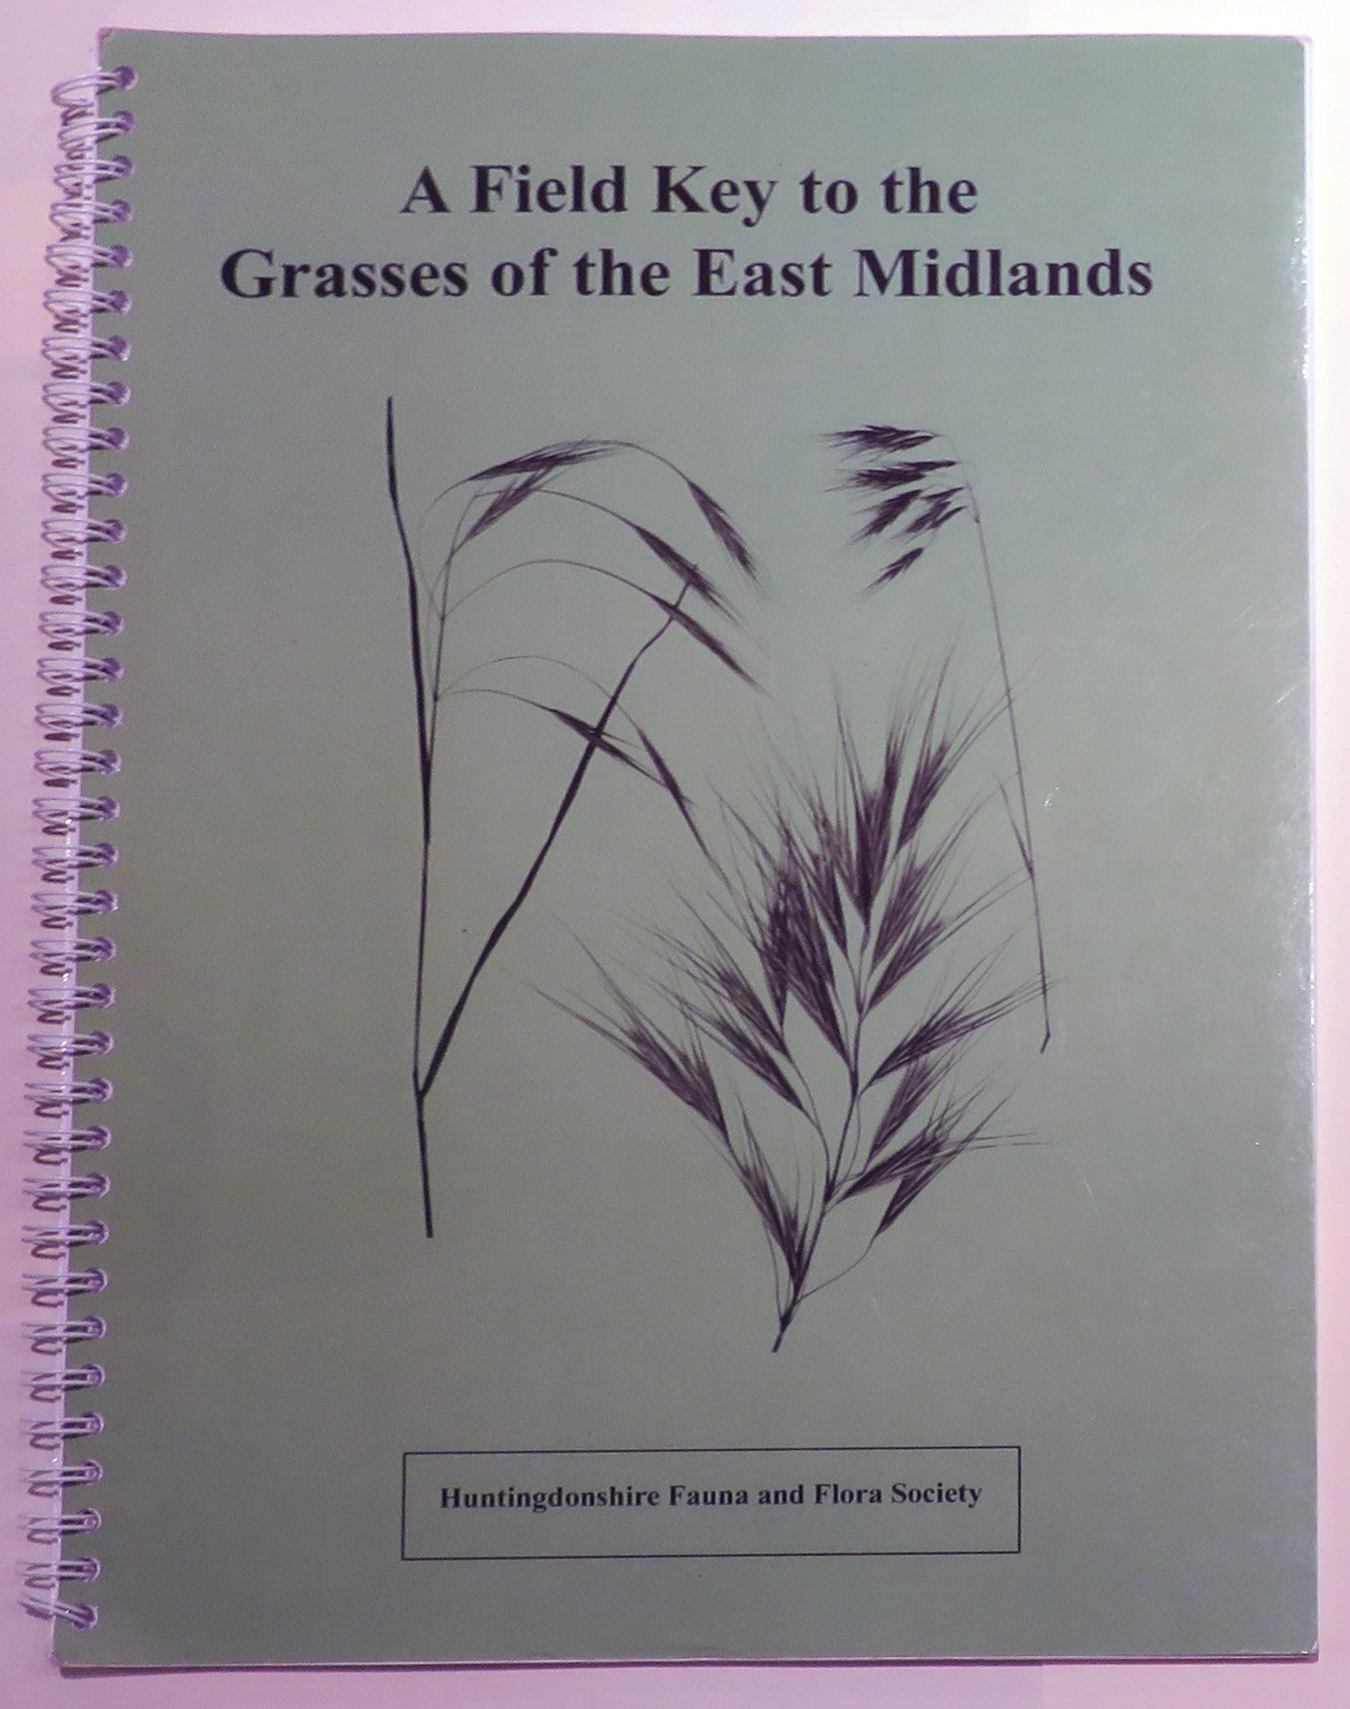 A Field Key to the Grasses of the East Midlands 